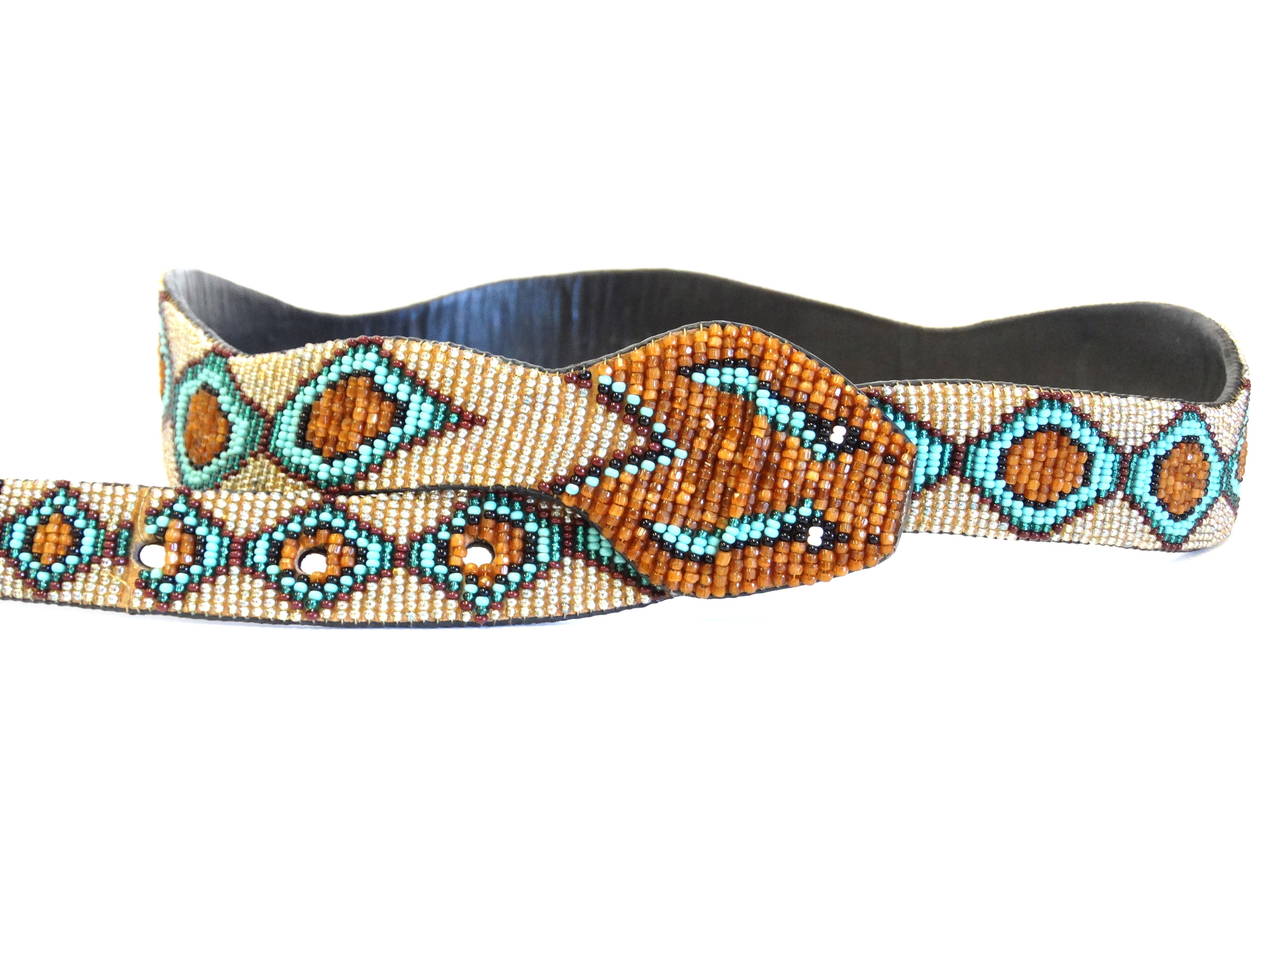 This beautiful 1991 handmade diamondback rattle snake belt is made of small high quality glass beads. Great in color, vibrant turquoise, copper, champagne, black and aqua make this belt into a true one of a kind character piece. Belt is backed with